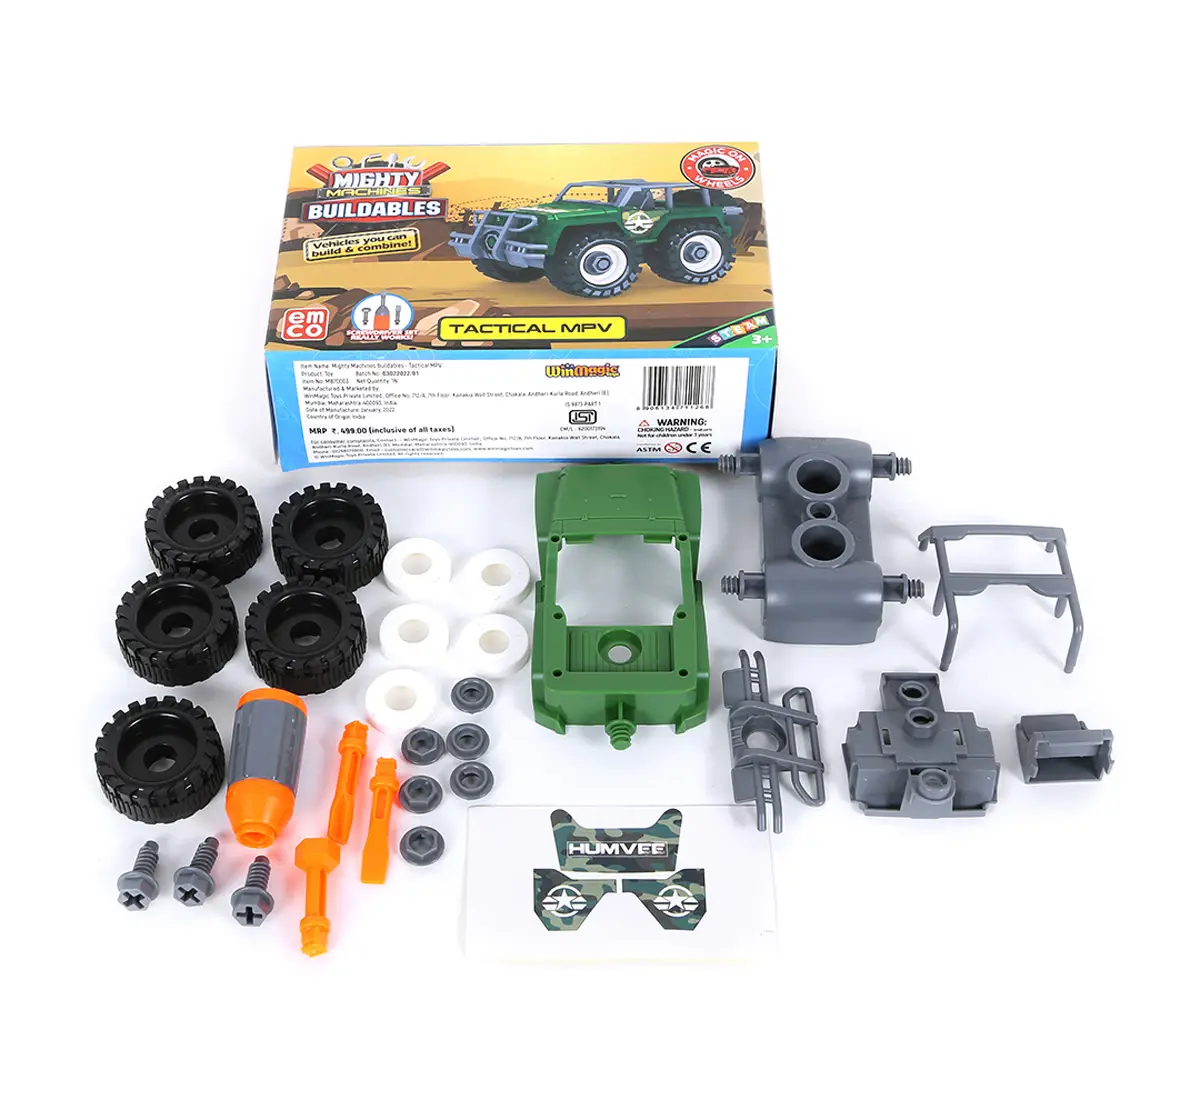 Mighty Machines Tactical Mpv Construction Vechile for kids 3Y+, Multicolour